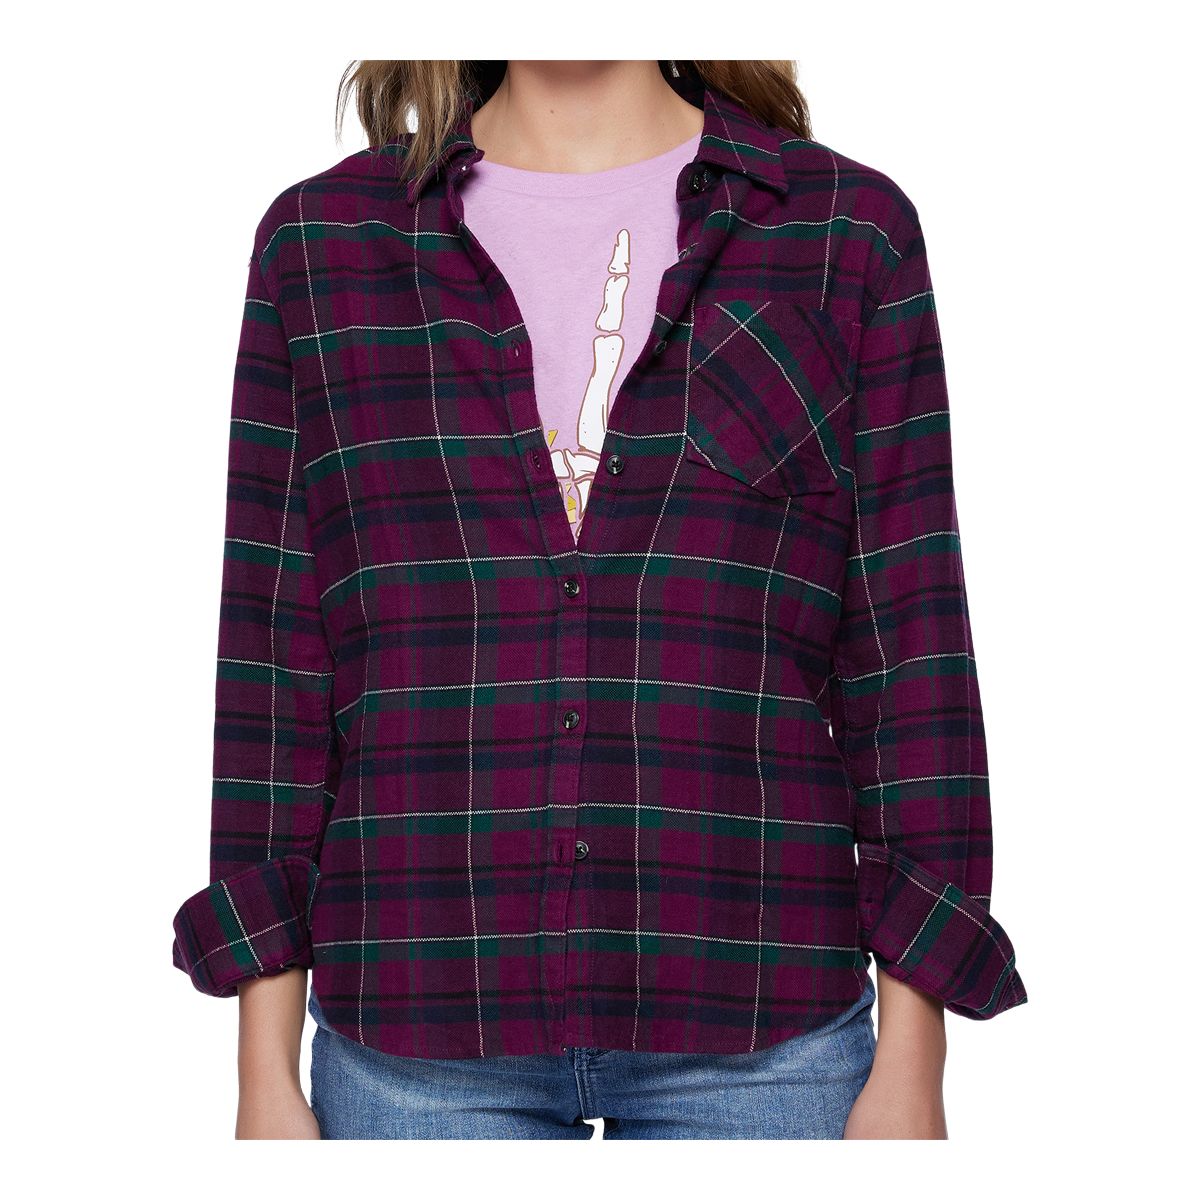 Image of O'Neill Women's Logan Flannel Top